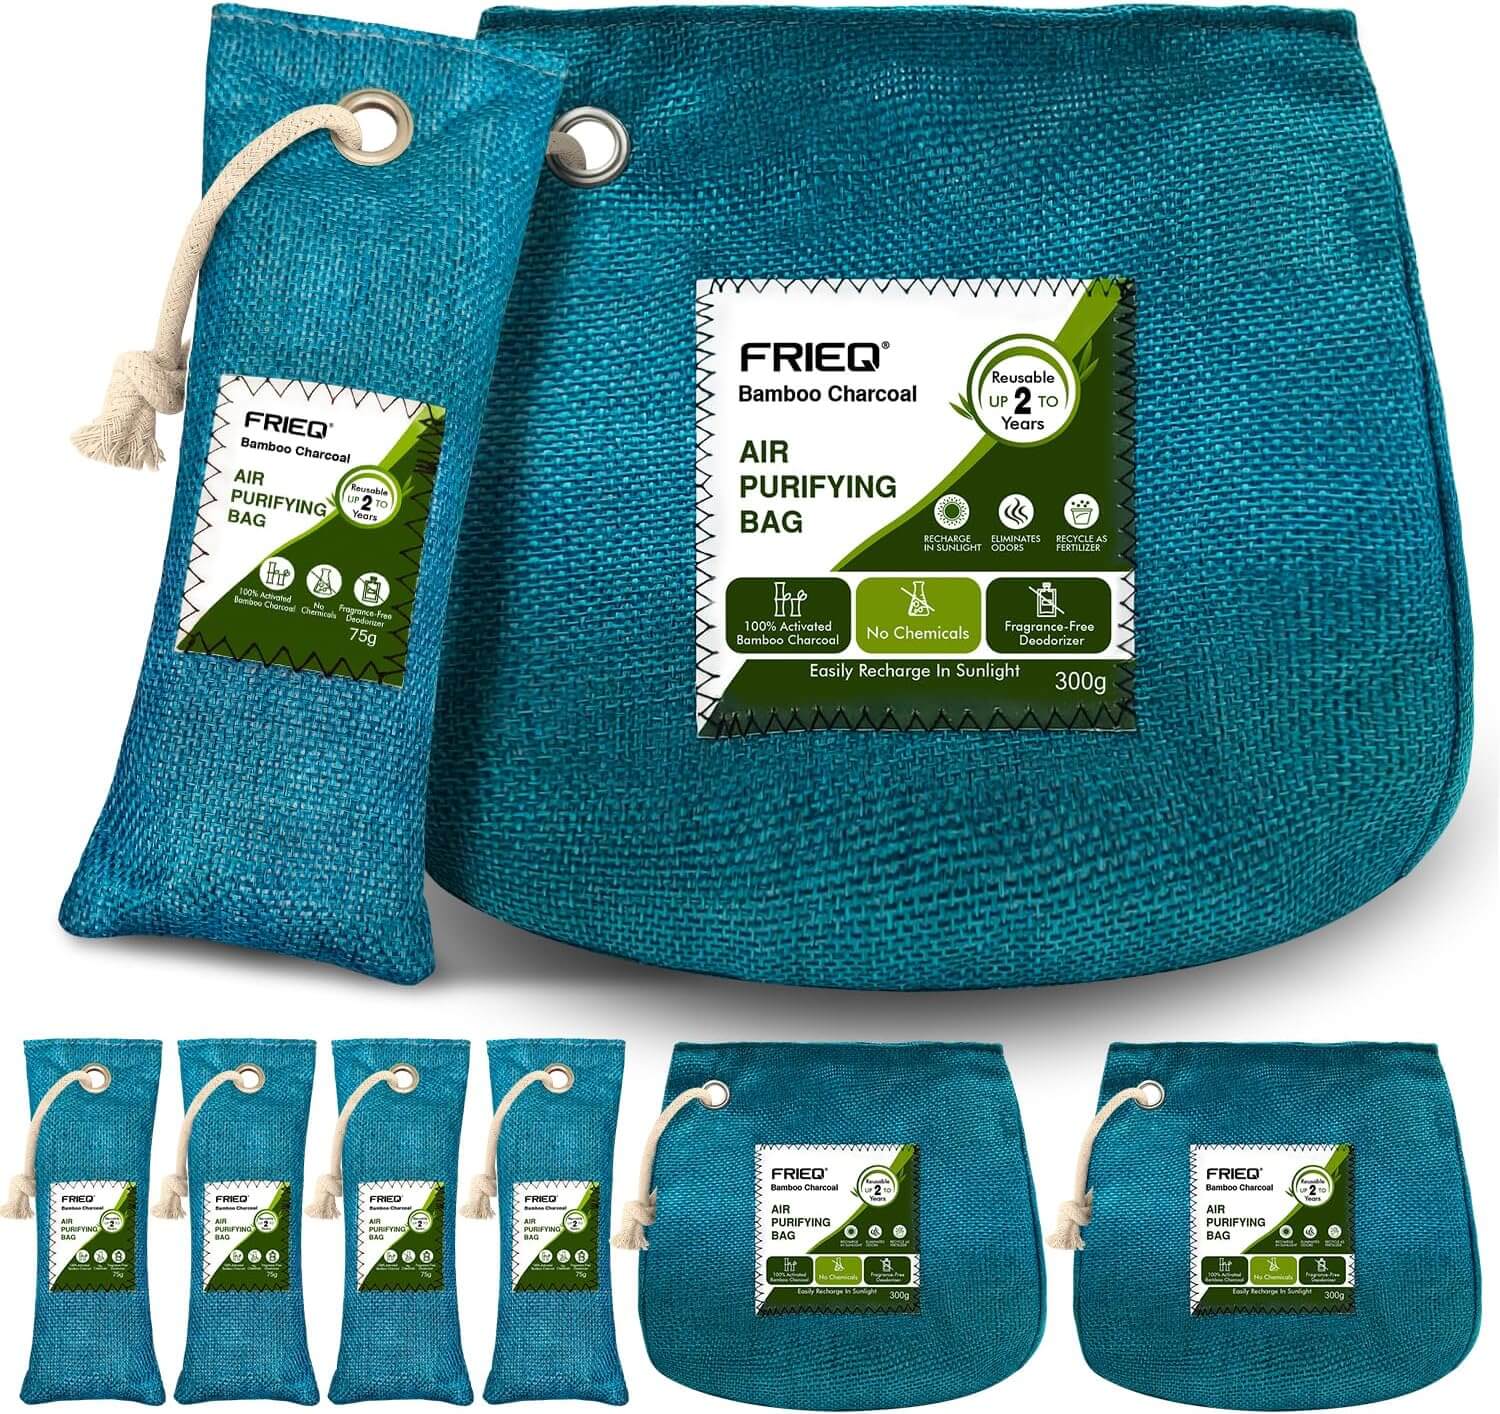 FRIEQ 6 Pack 100% Activated Bamboo Charcoal Air Purifying Bag | Lasts 365+ Days | Charcoal Bags Odor Absorber for Car, Home, Closet, Pet, Shoe